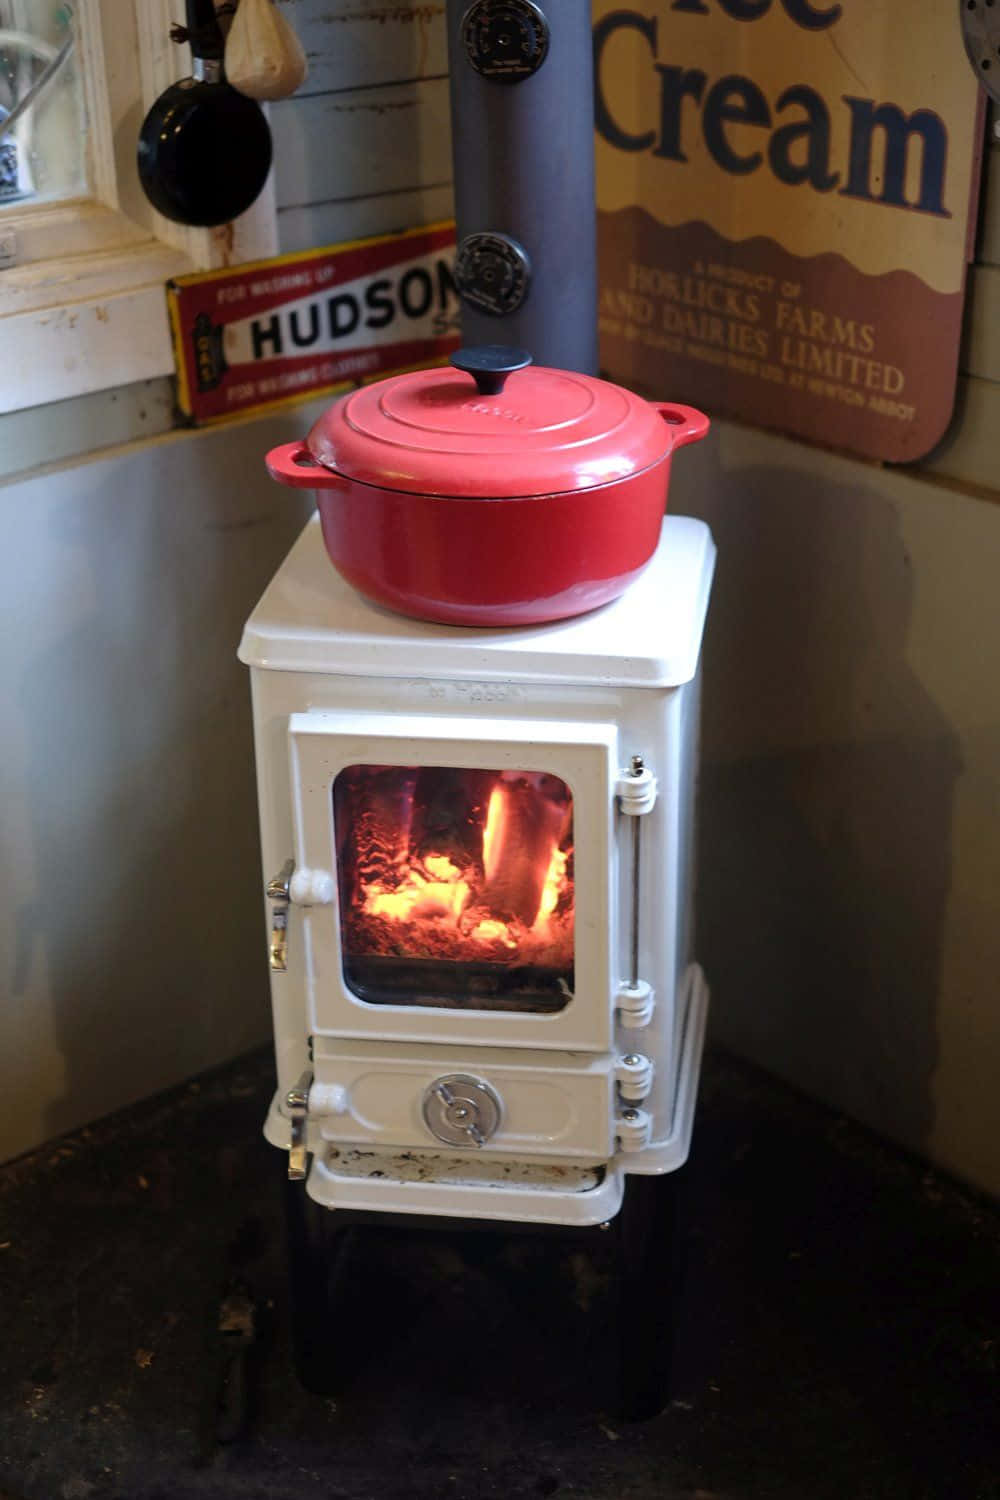 A Stove With A Red Pot On Top